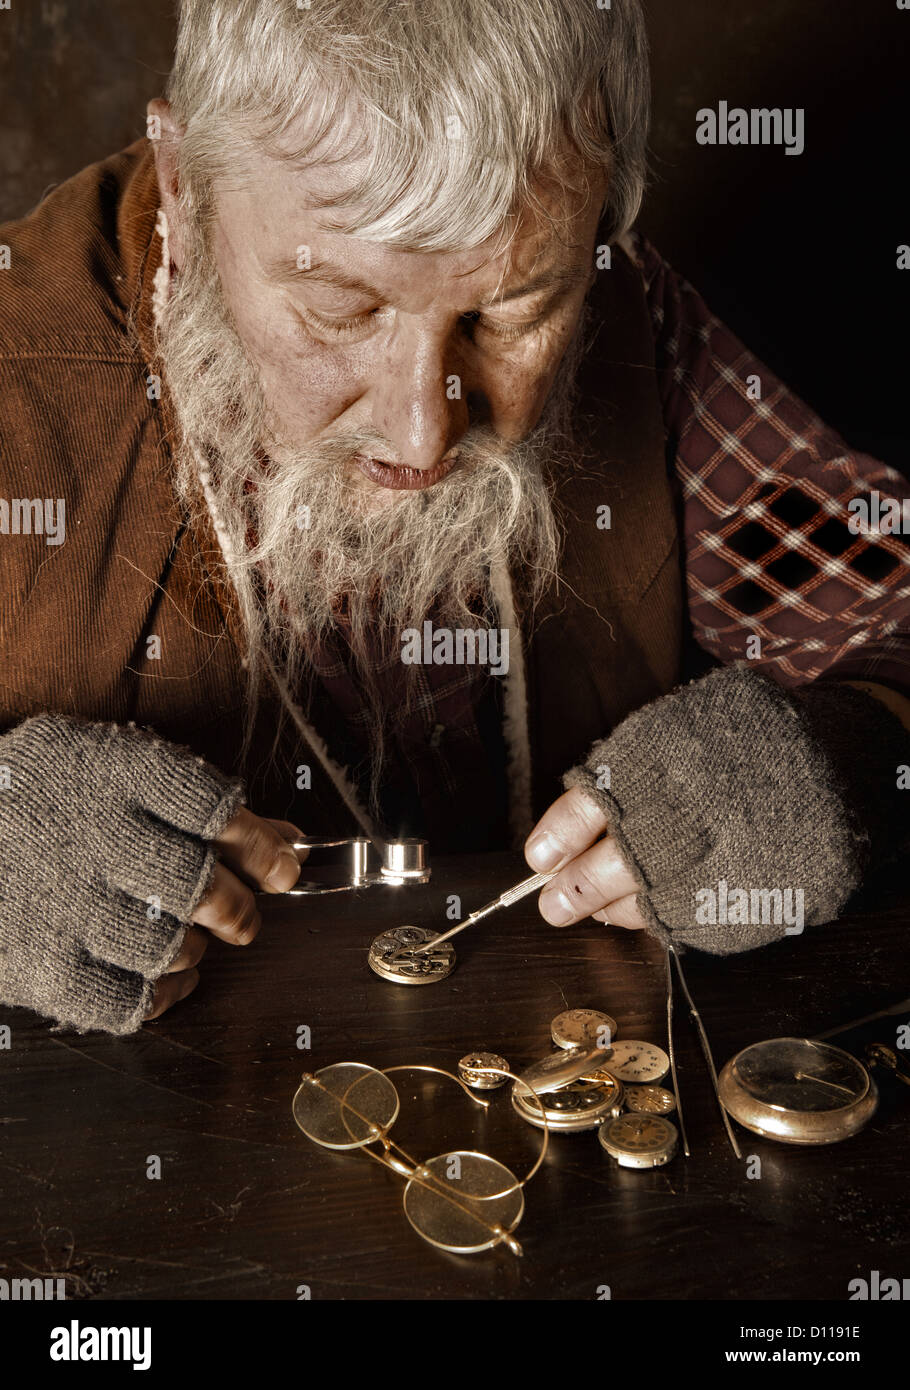 Old bearded man reparing antique watches using a magnifying glass Stock Photo